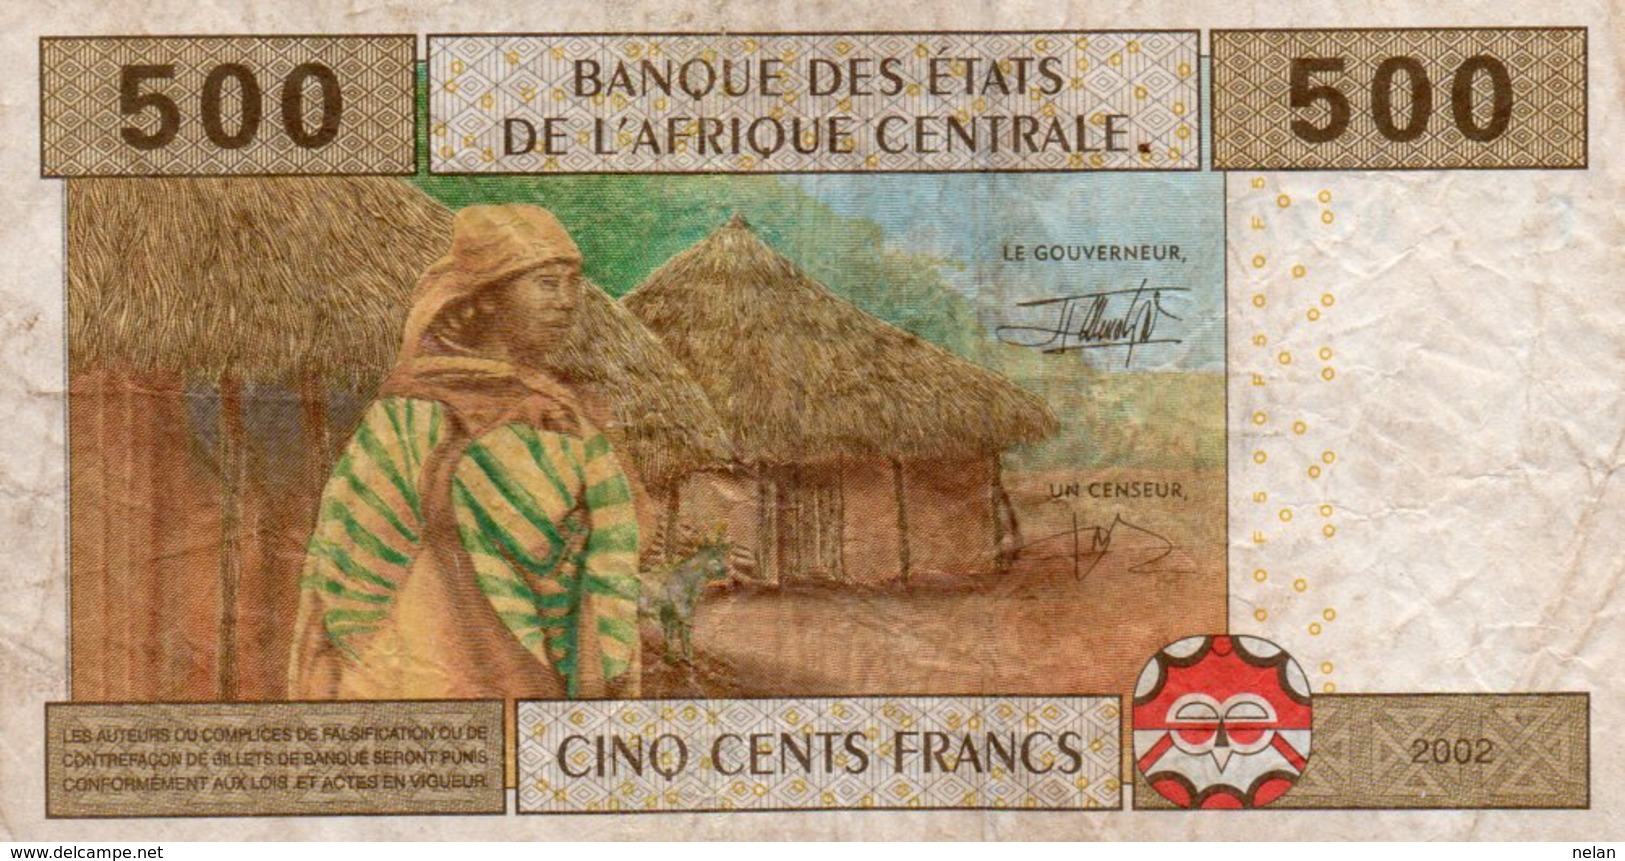 CENTRAL AFRICAN STATES 500 FRANCS 2002 P-506 Fa F For Equatorial Guinea  CIRC. - Centraal-Afrikaanse Staten